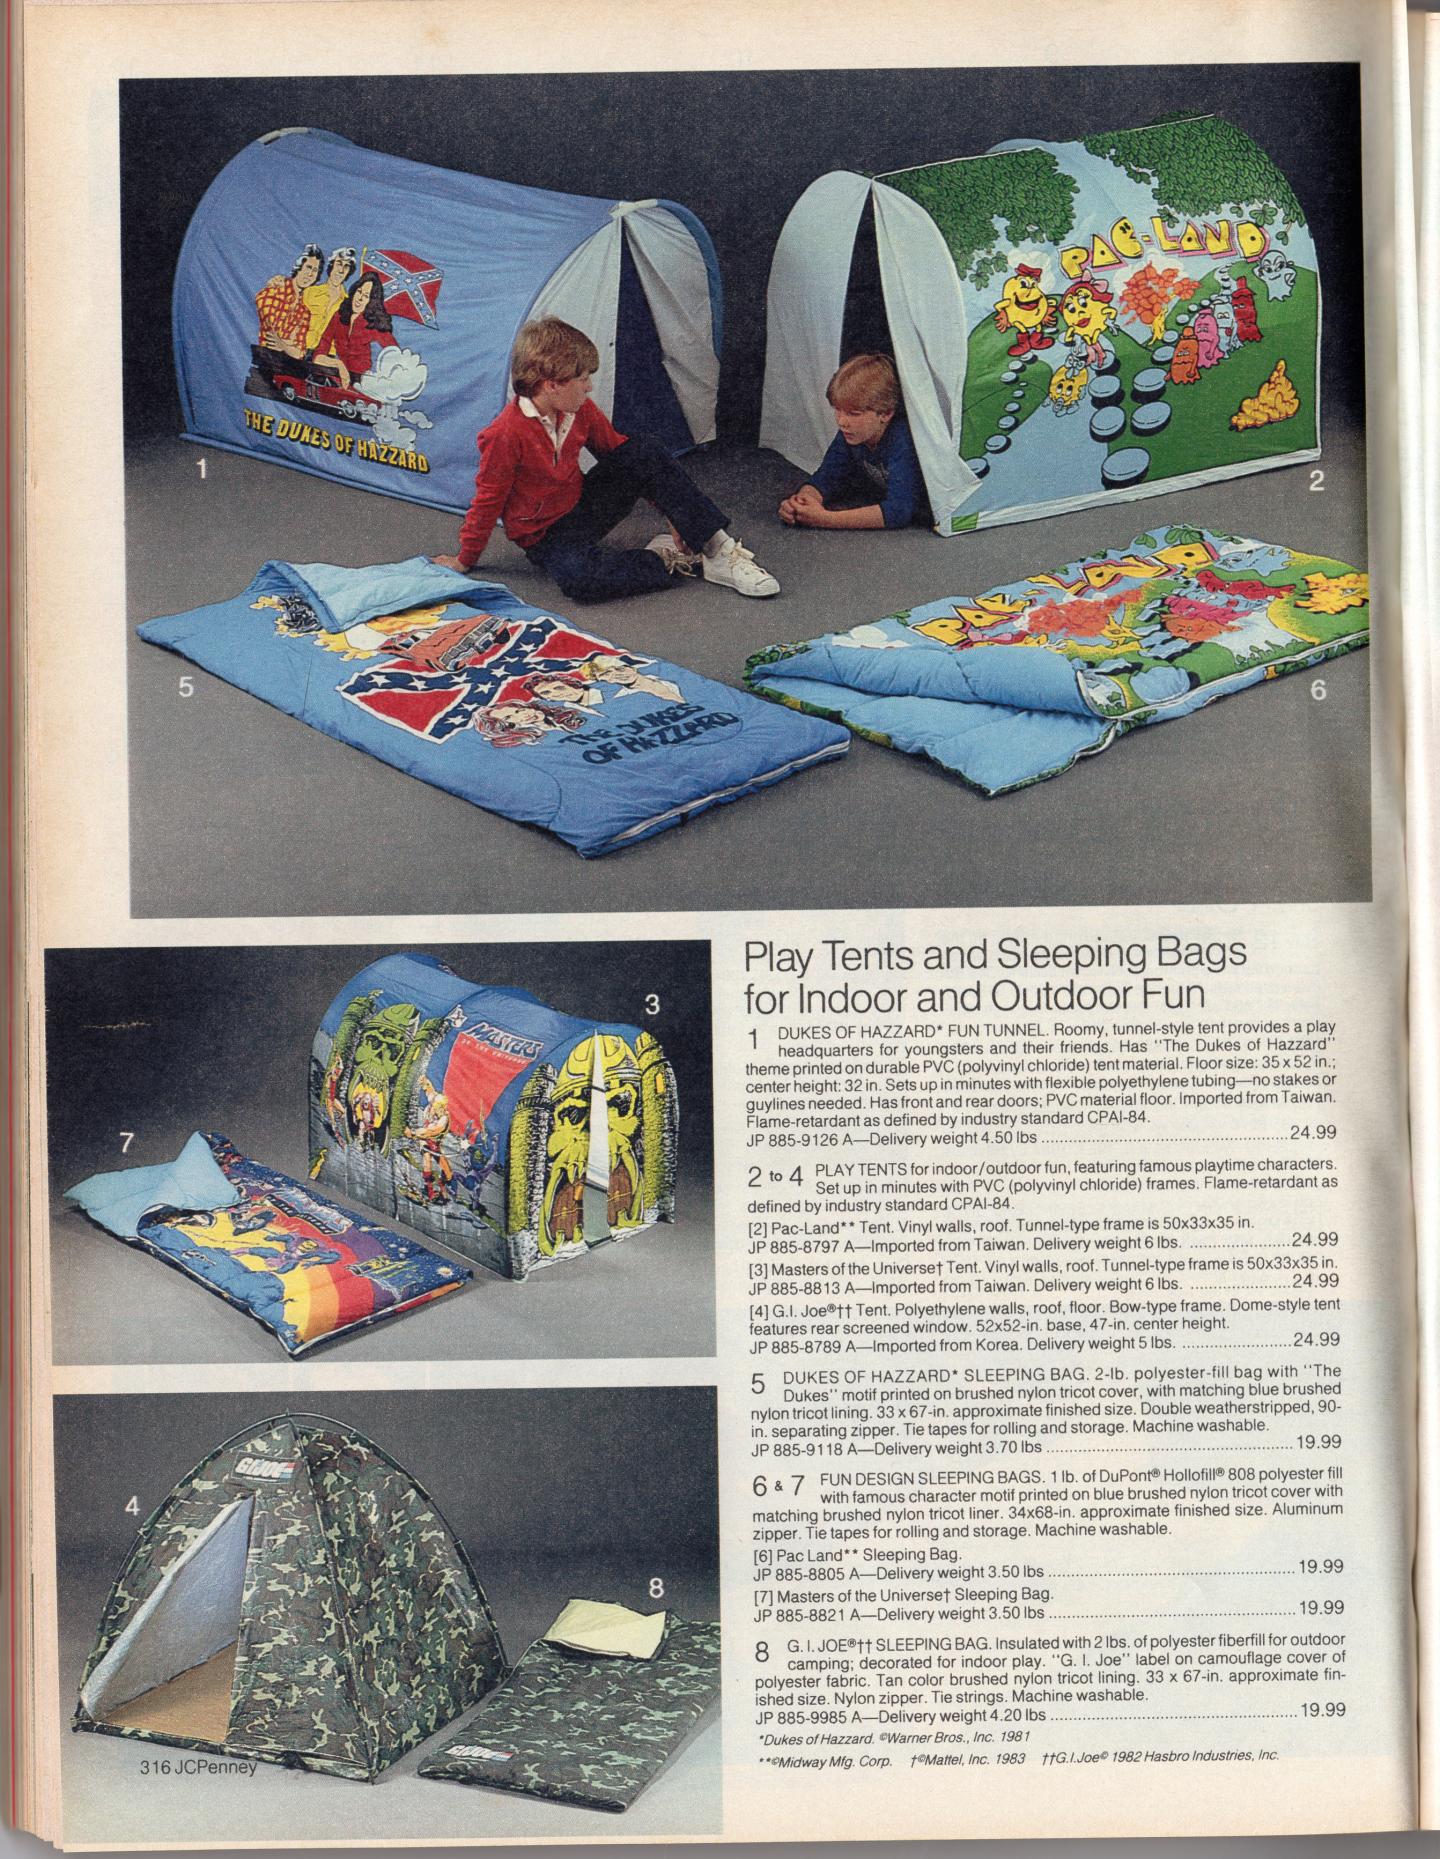 JCPenney Catalogs, 1982-1986